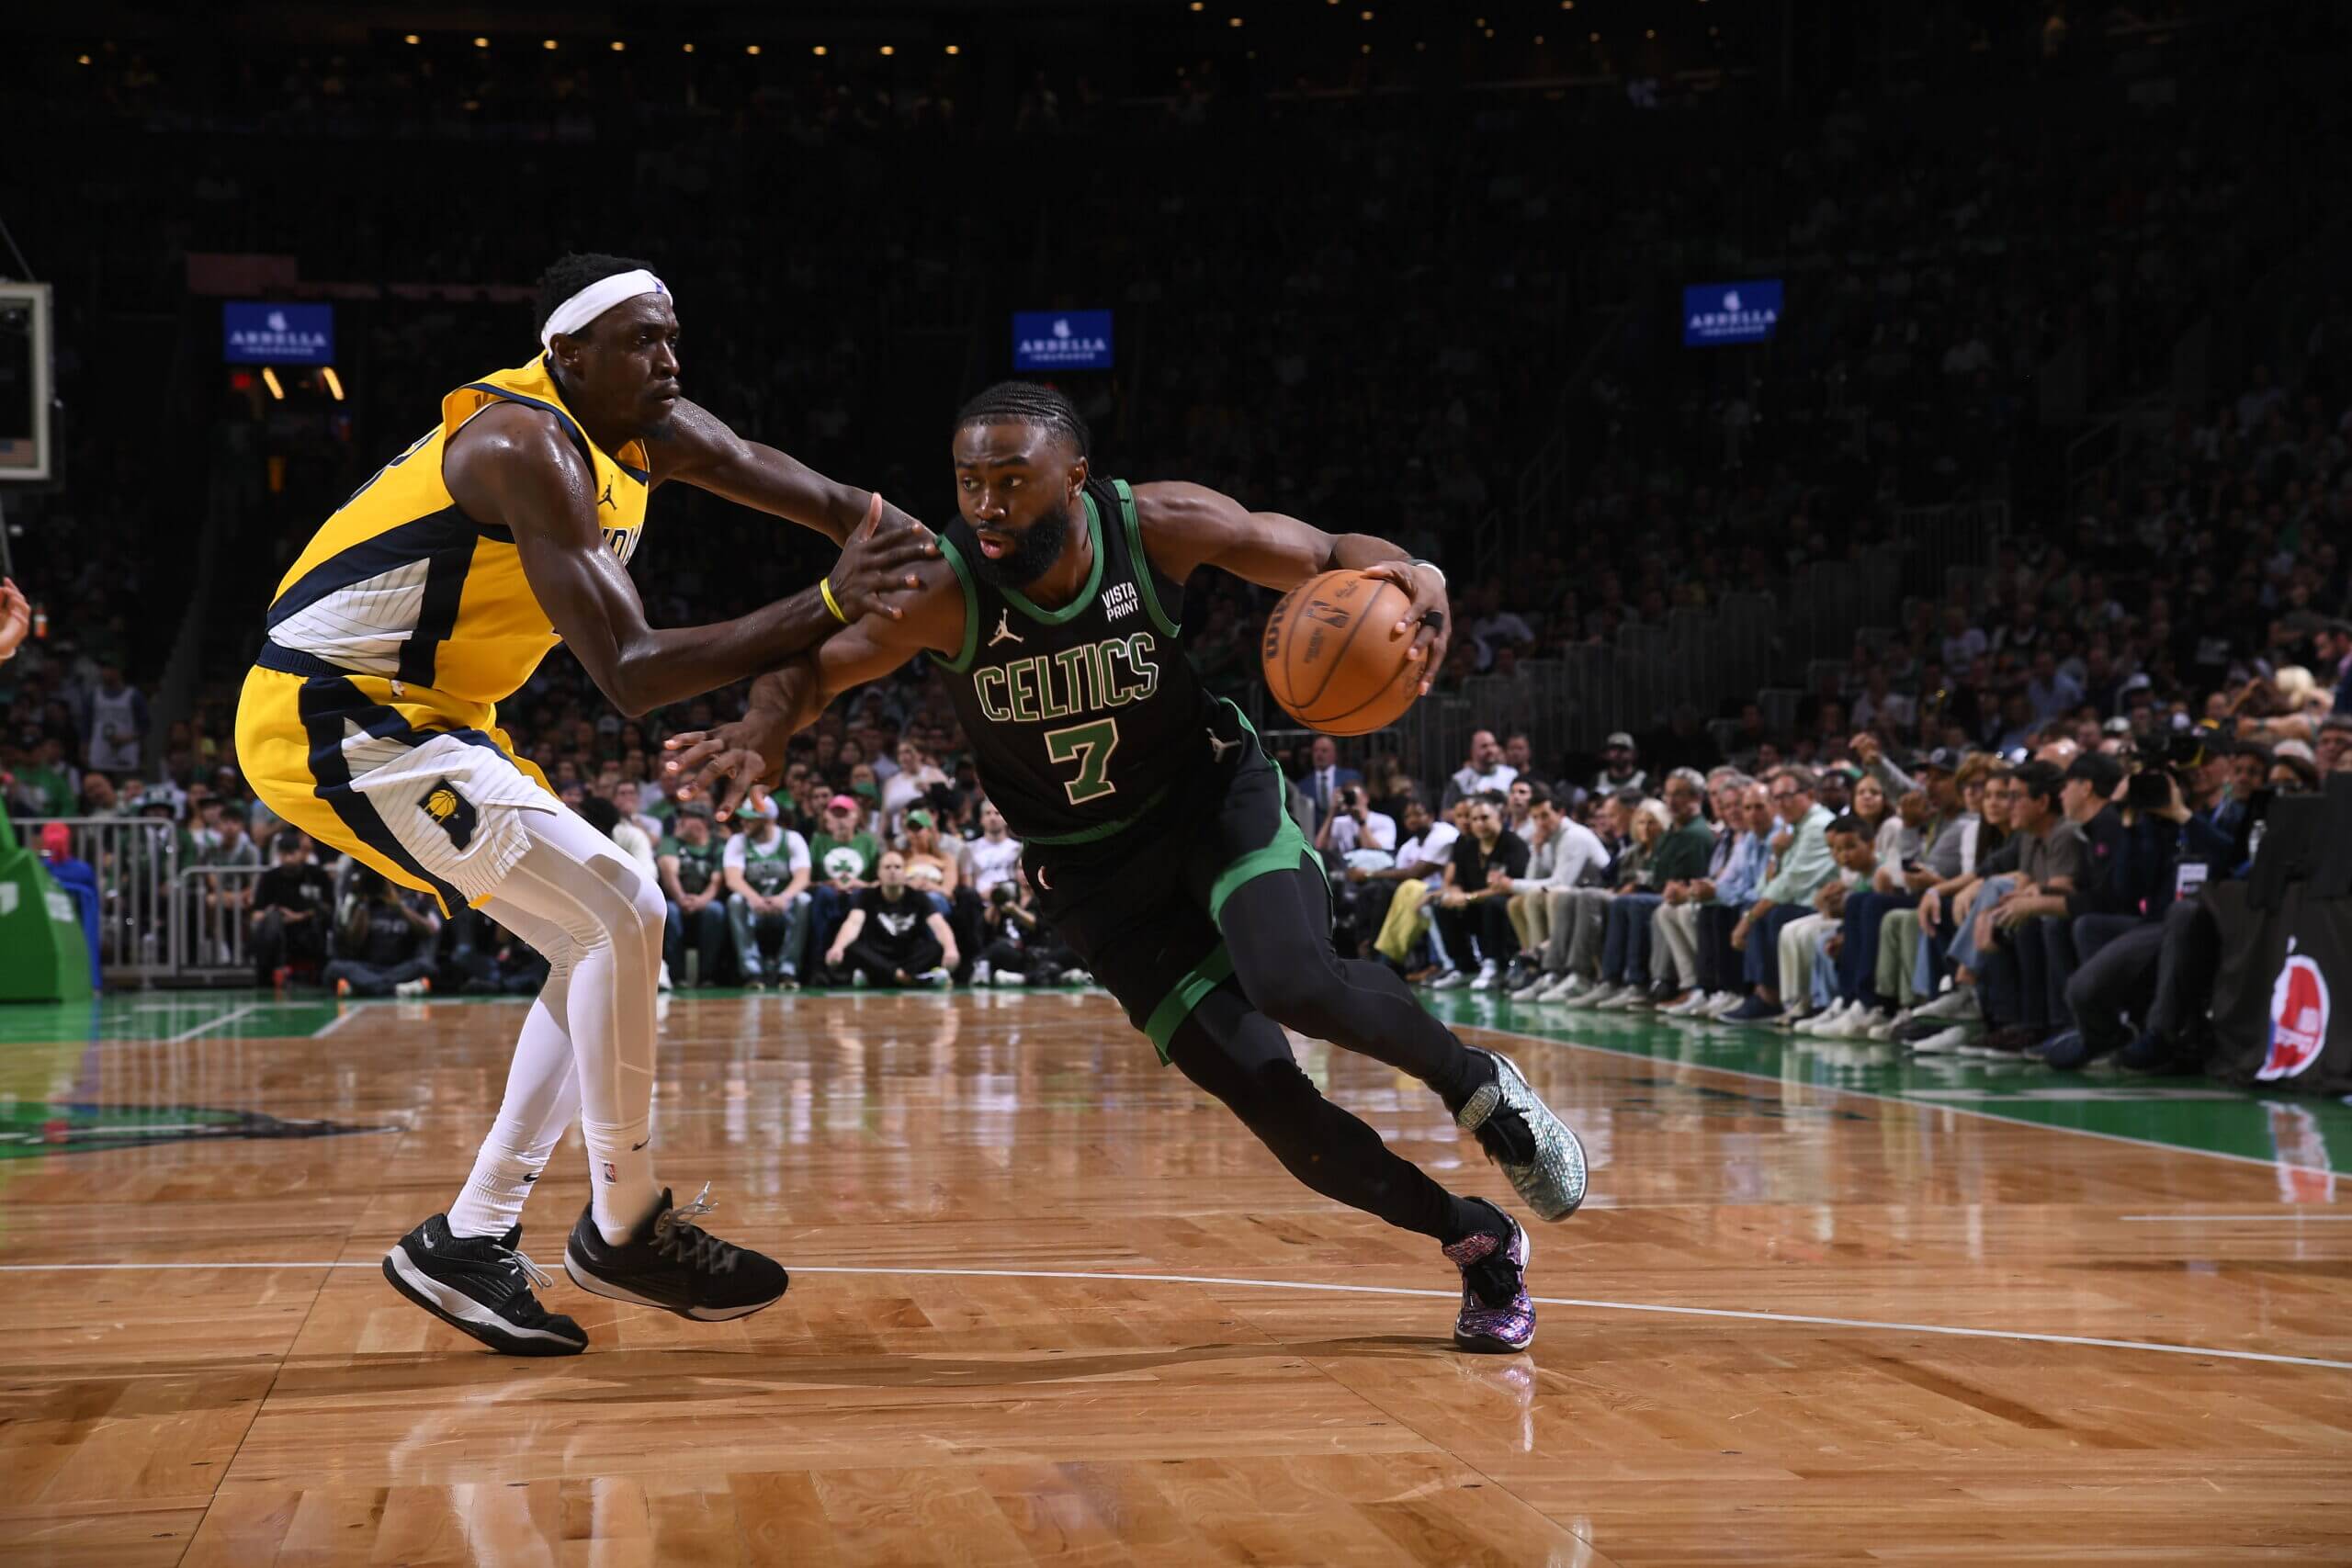 Celtics at Pacers Game 3 odds, expert picks: Can Pacers fare better at home?